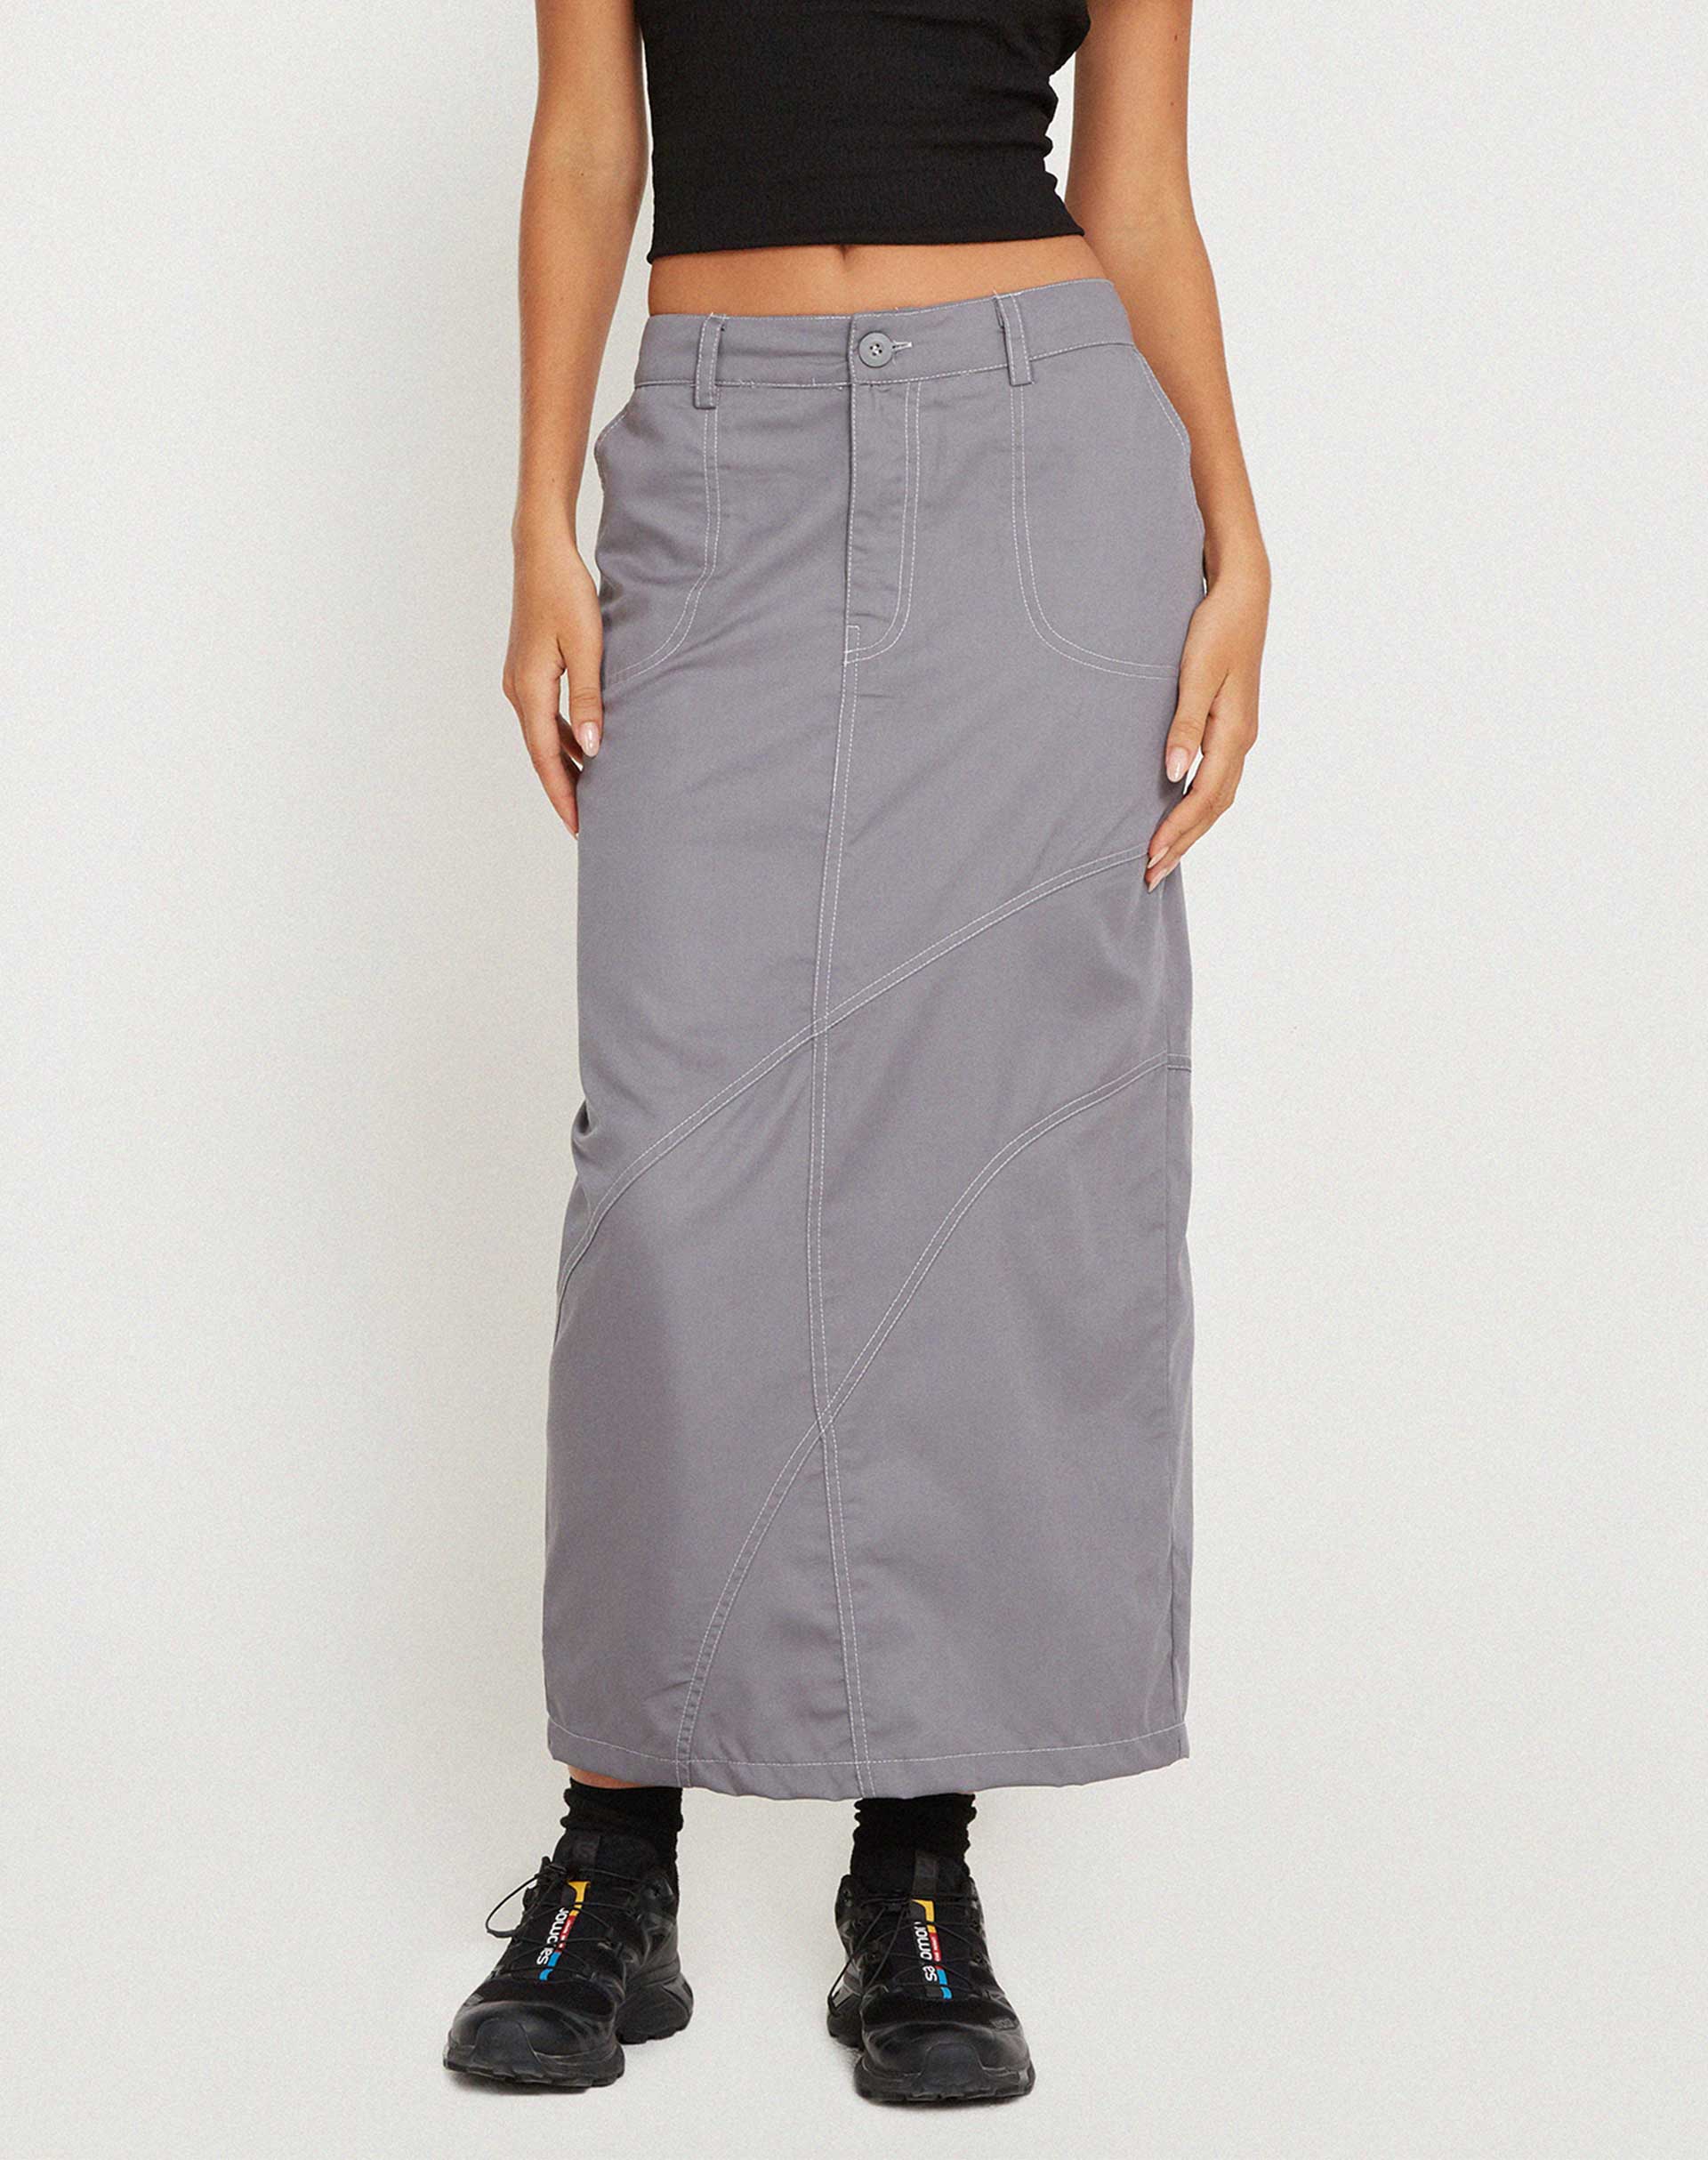 image of Reese Cargo Midi Skirt in Charcoal Grey with White Stitch